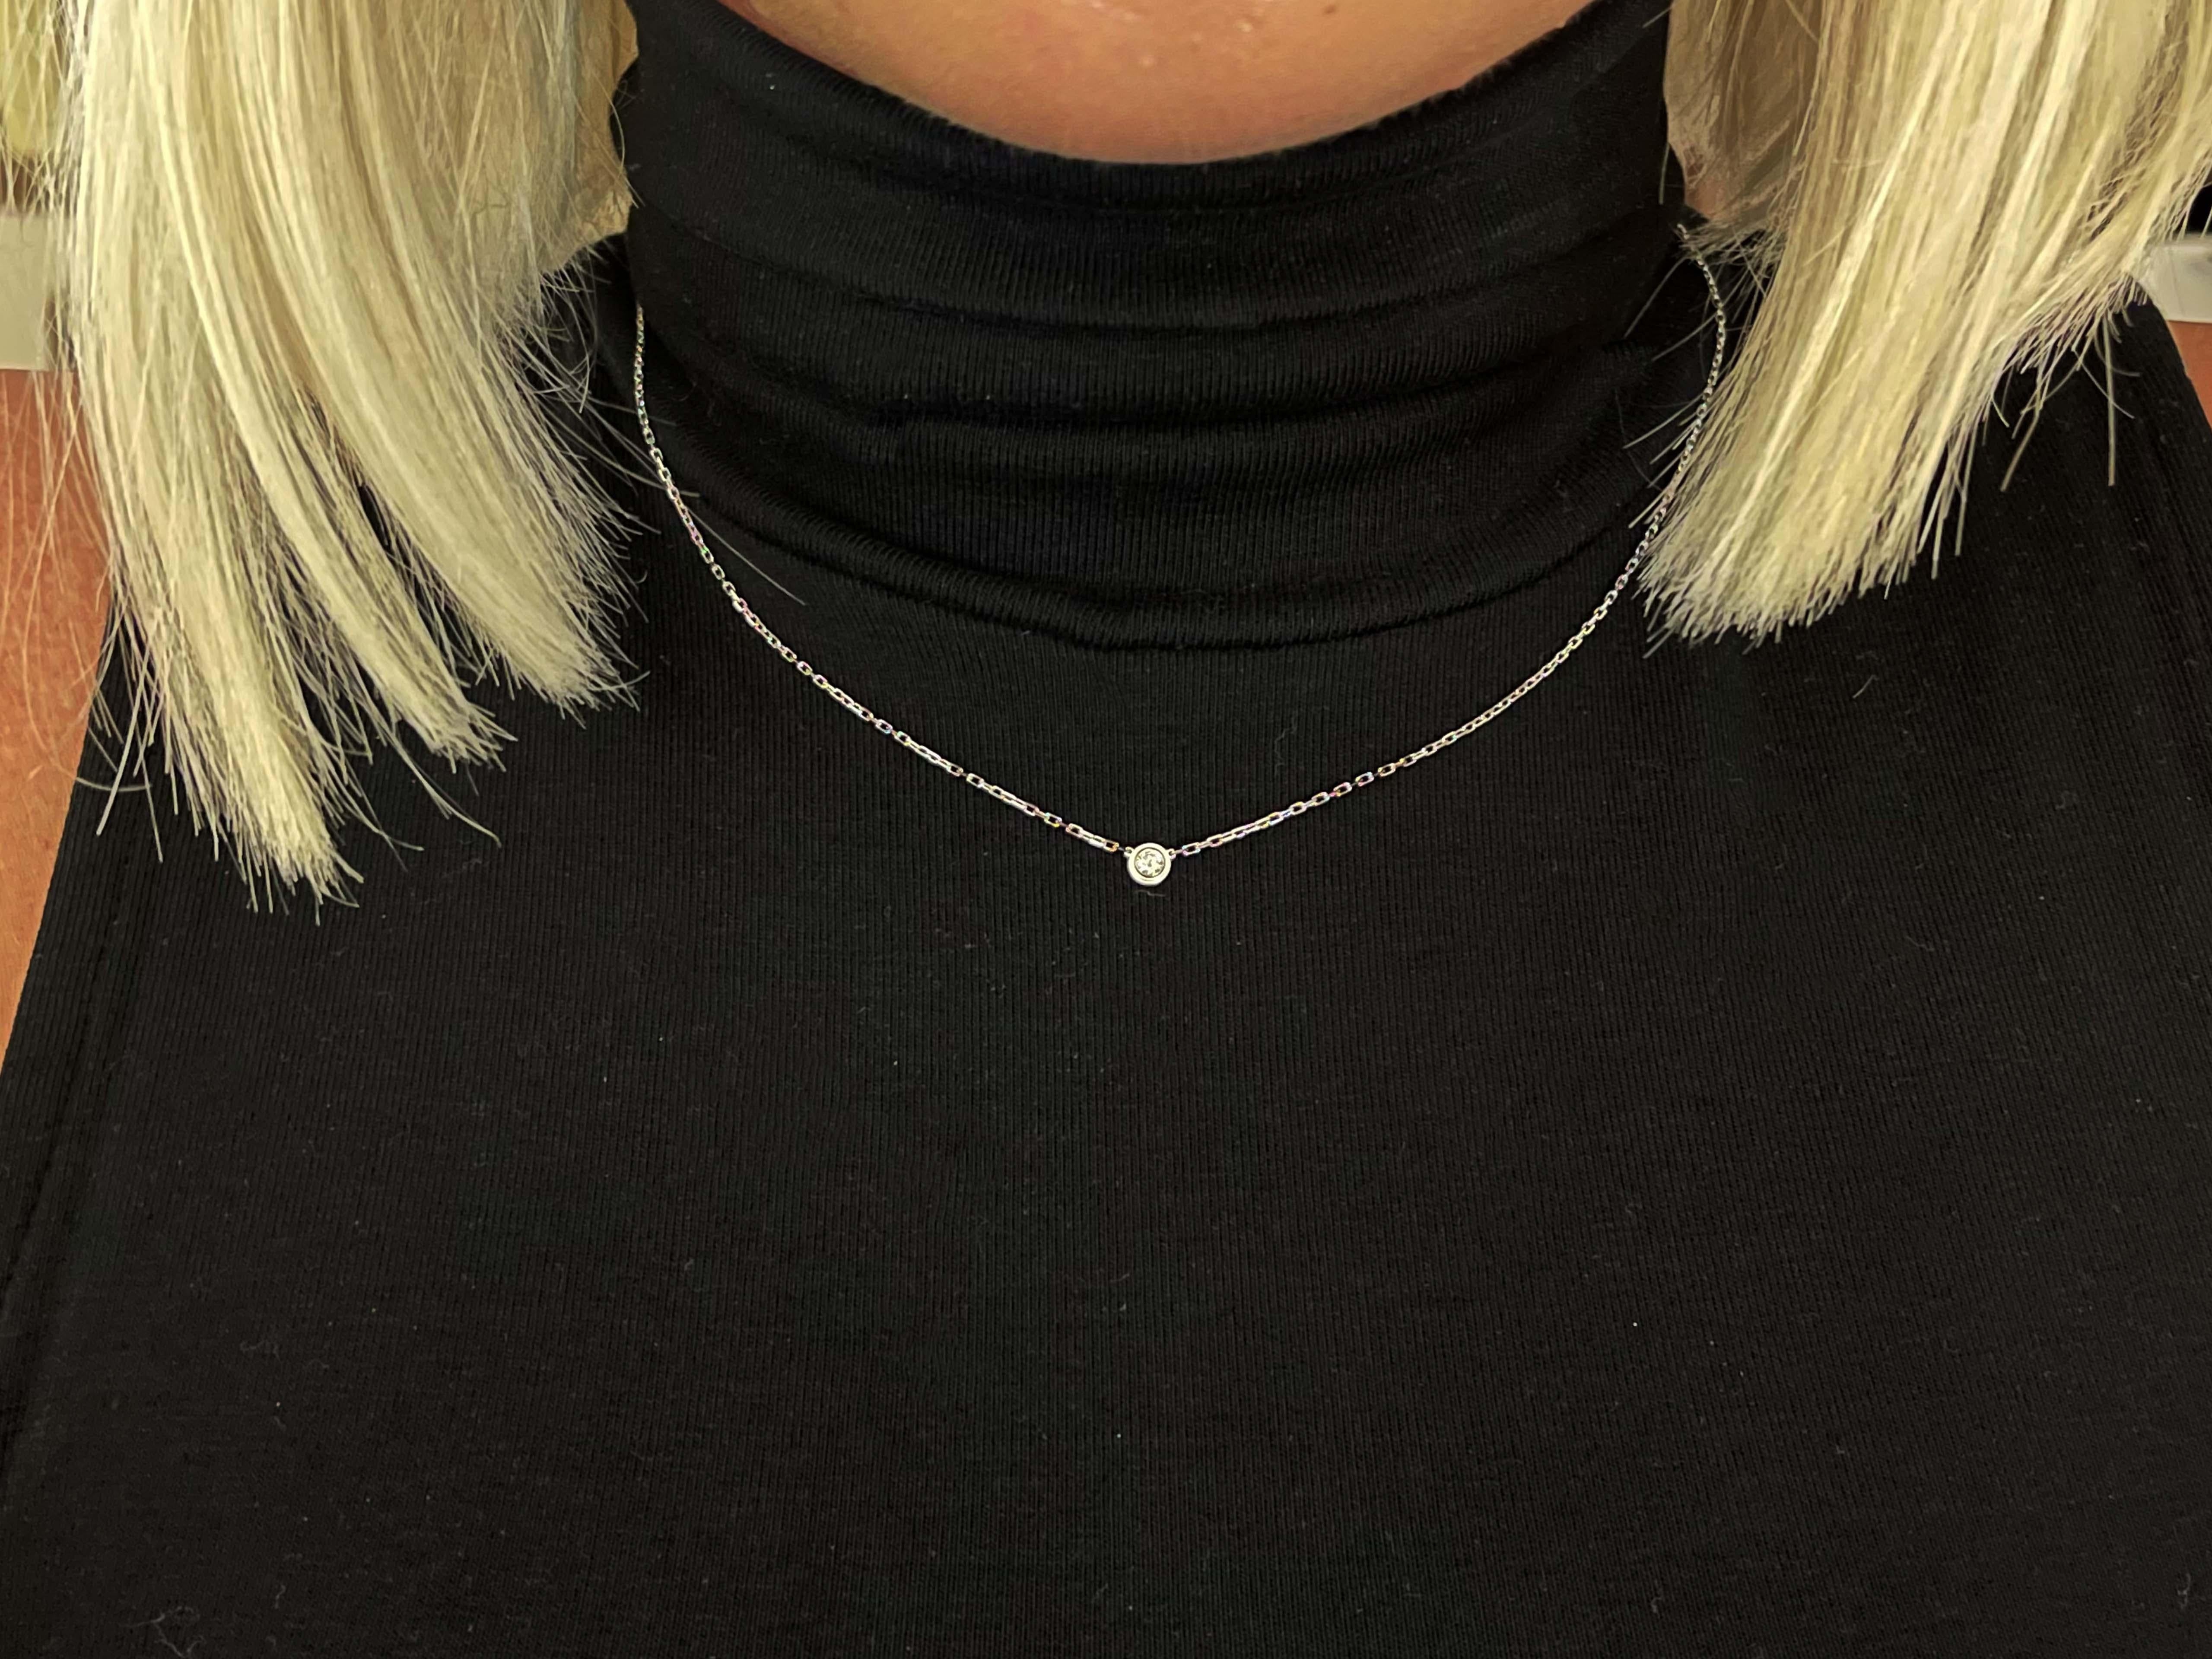 Cartier d'Amour necklace, small model, 18K white gold, set with a brilliant-cut diamond totaling 0.09 carat. Diameter of the pattern: 4.5 mm. The diamond is D-F in color, VS in clarity. Comes on a 14